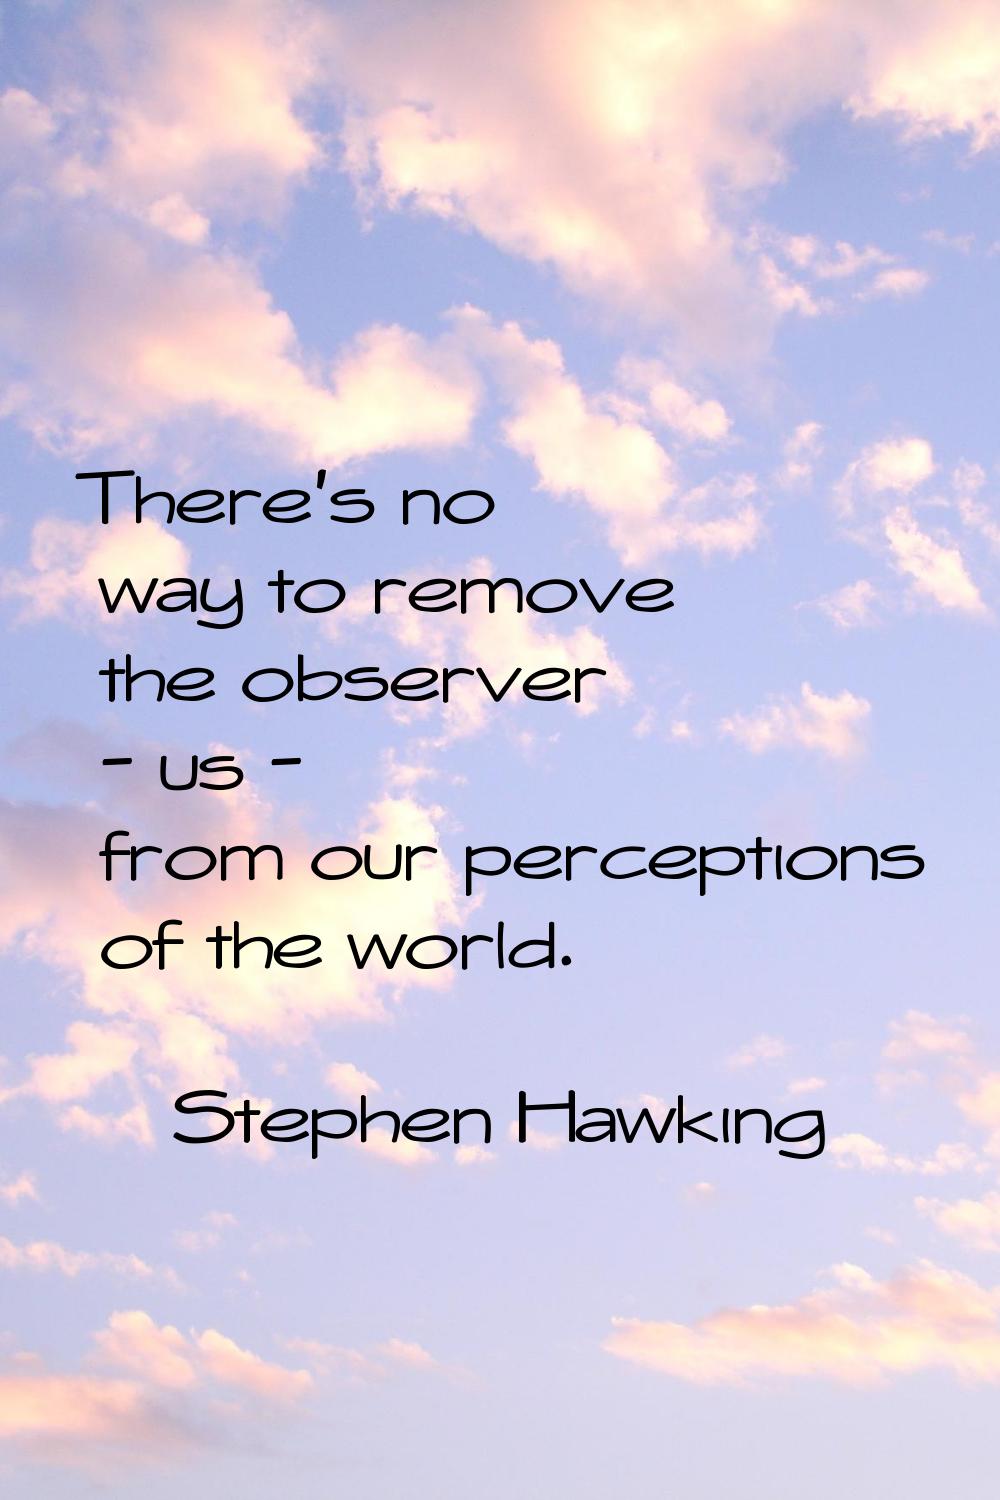 There's no way to remove the observer - us - from our perceptions of the world.